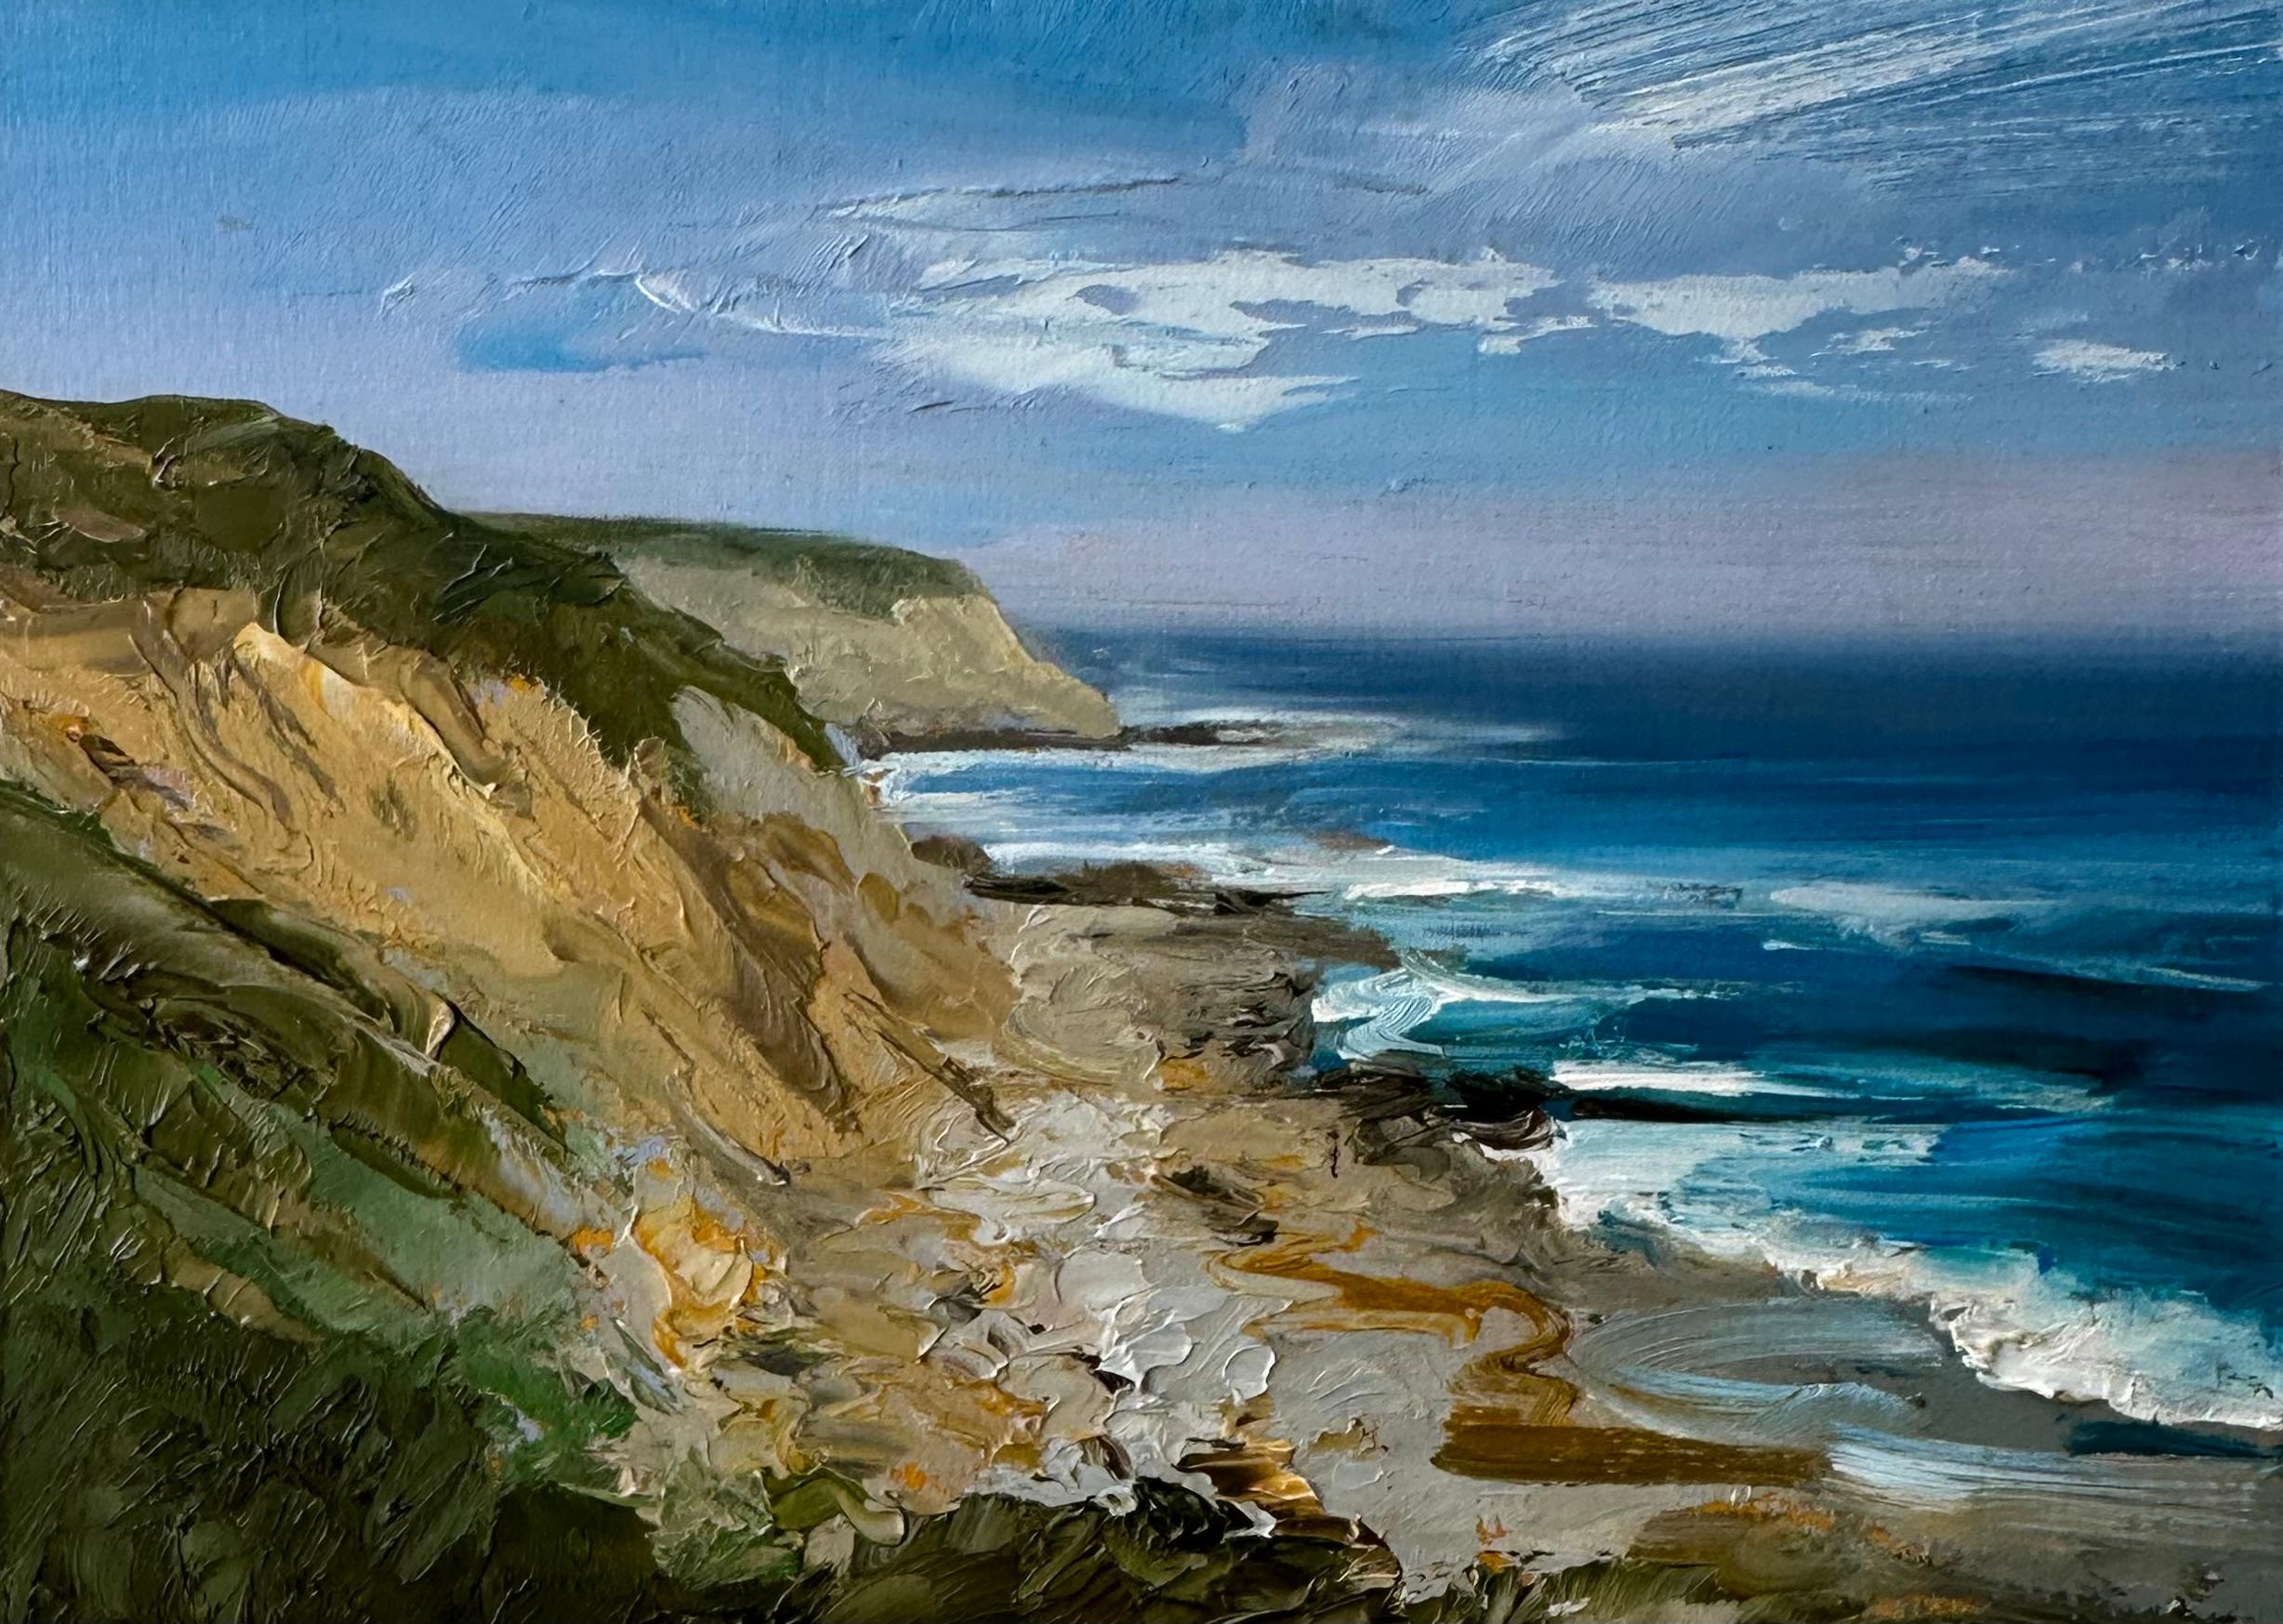 Whitney Knapp Landscape Painting - "These Days", a landscape oil painting with a picturesque cliff edge and shore